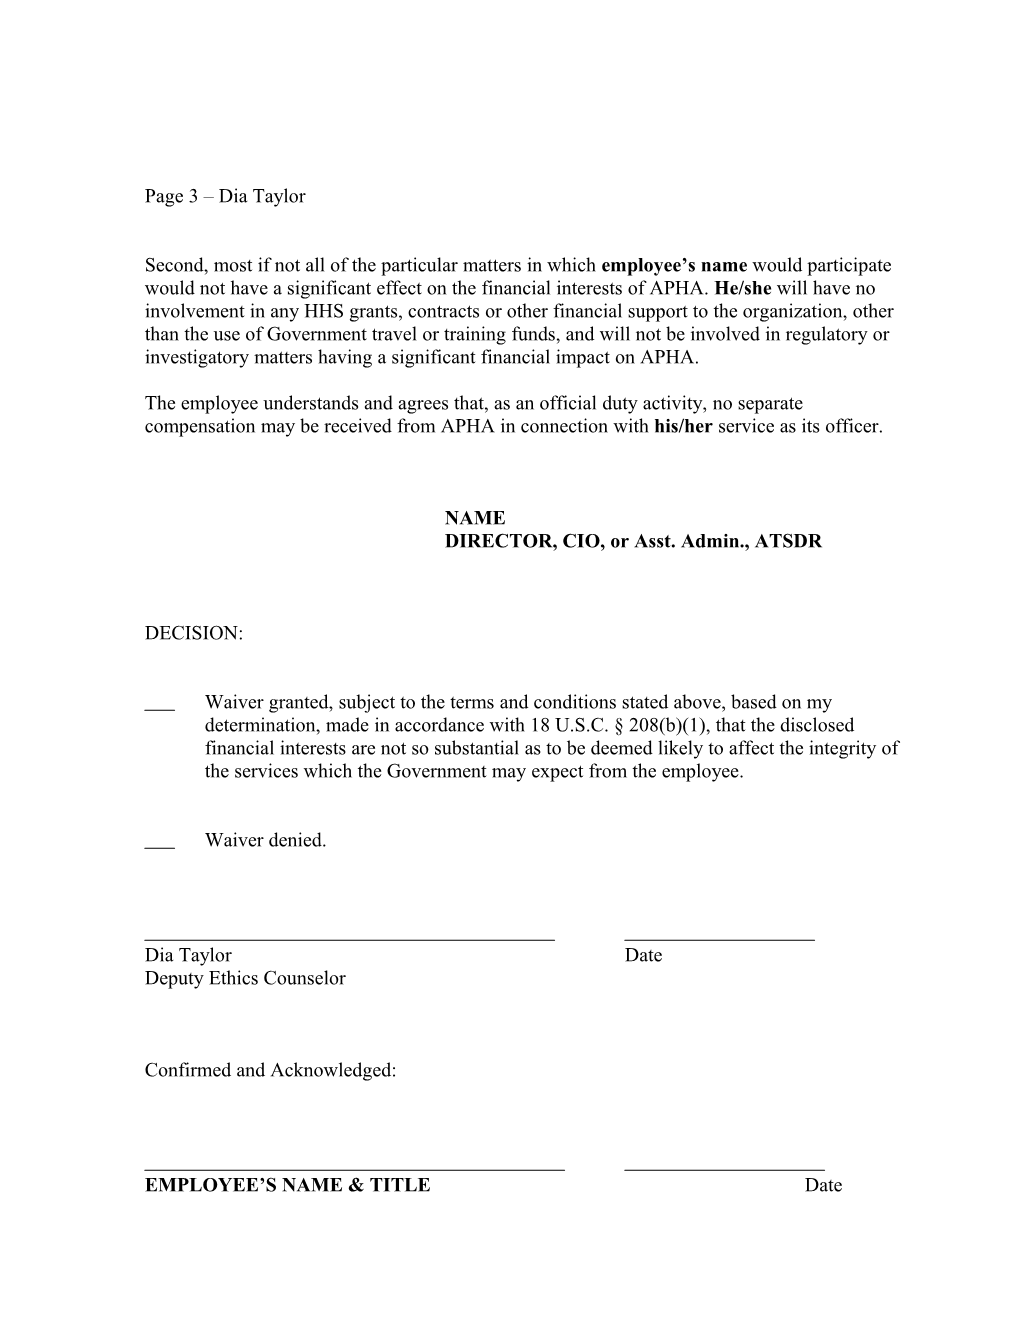 Sample - Request for Conflict of Interest Waiver